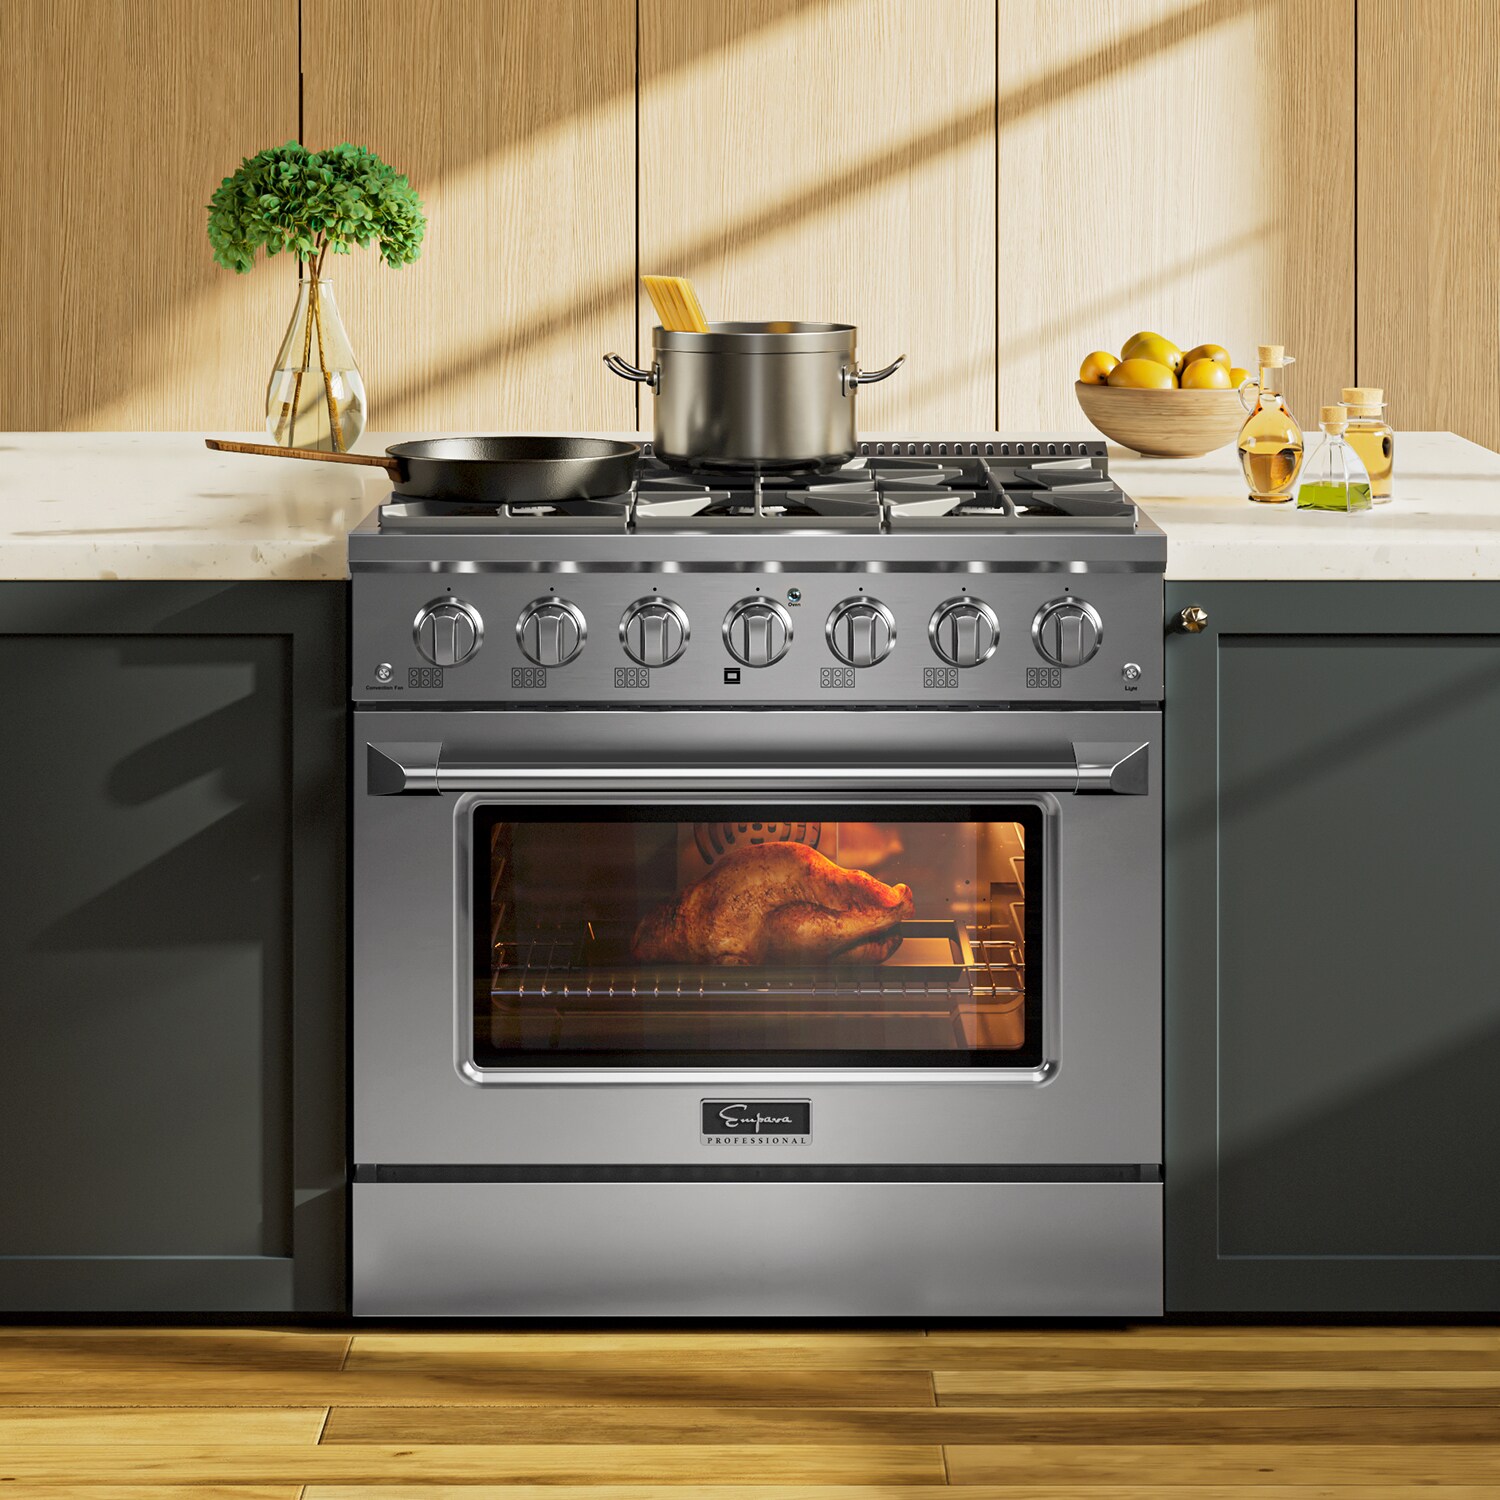 Unique Appliances Prestige 24 in. 2.3 Cu. ft. Electric Range with Convection Oven in Stainless Steel, Silver